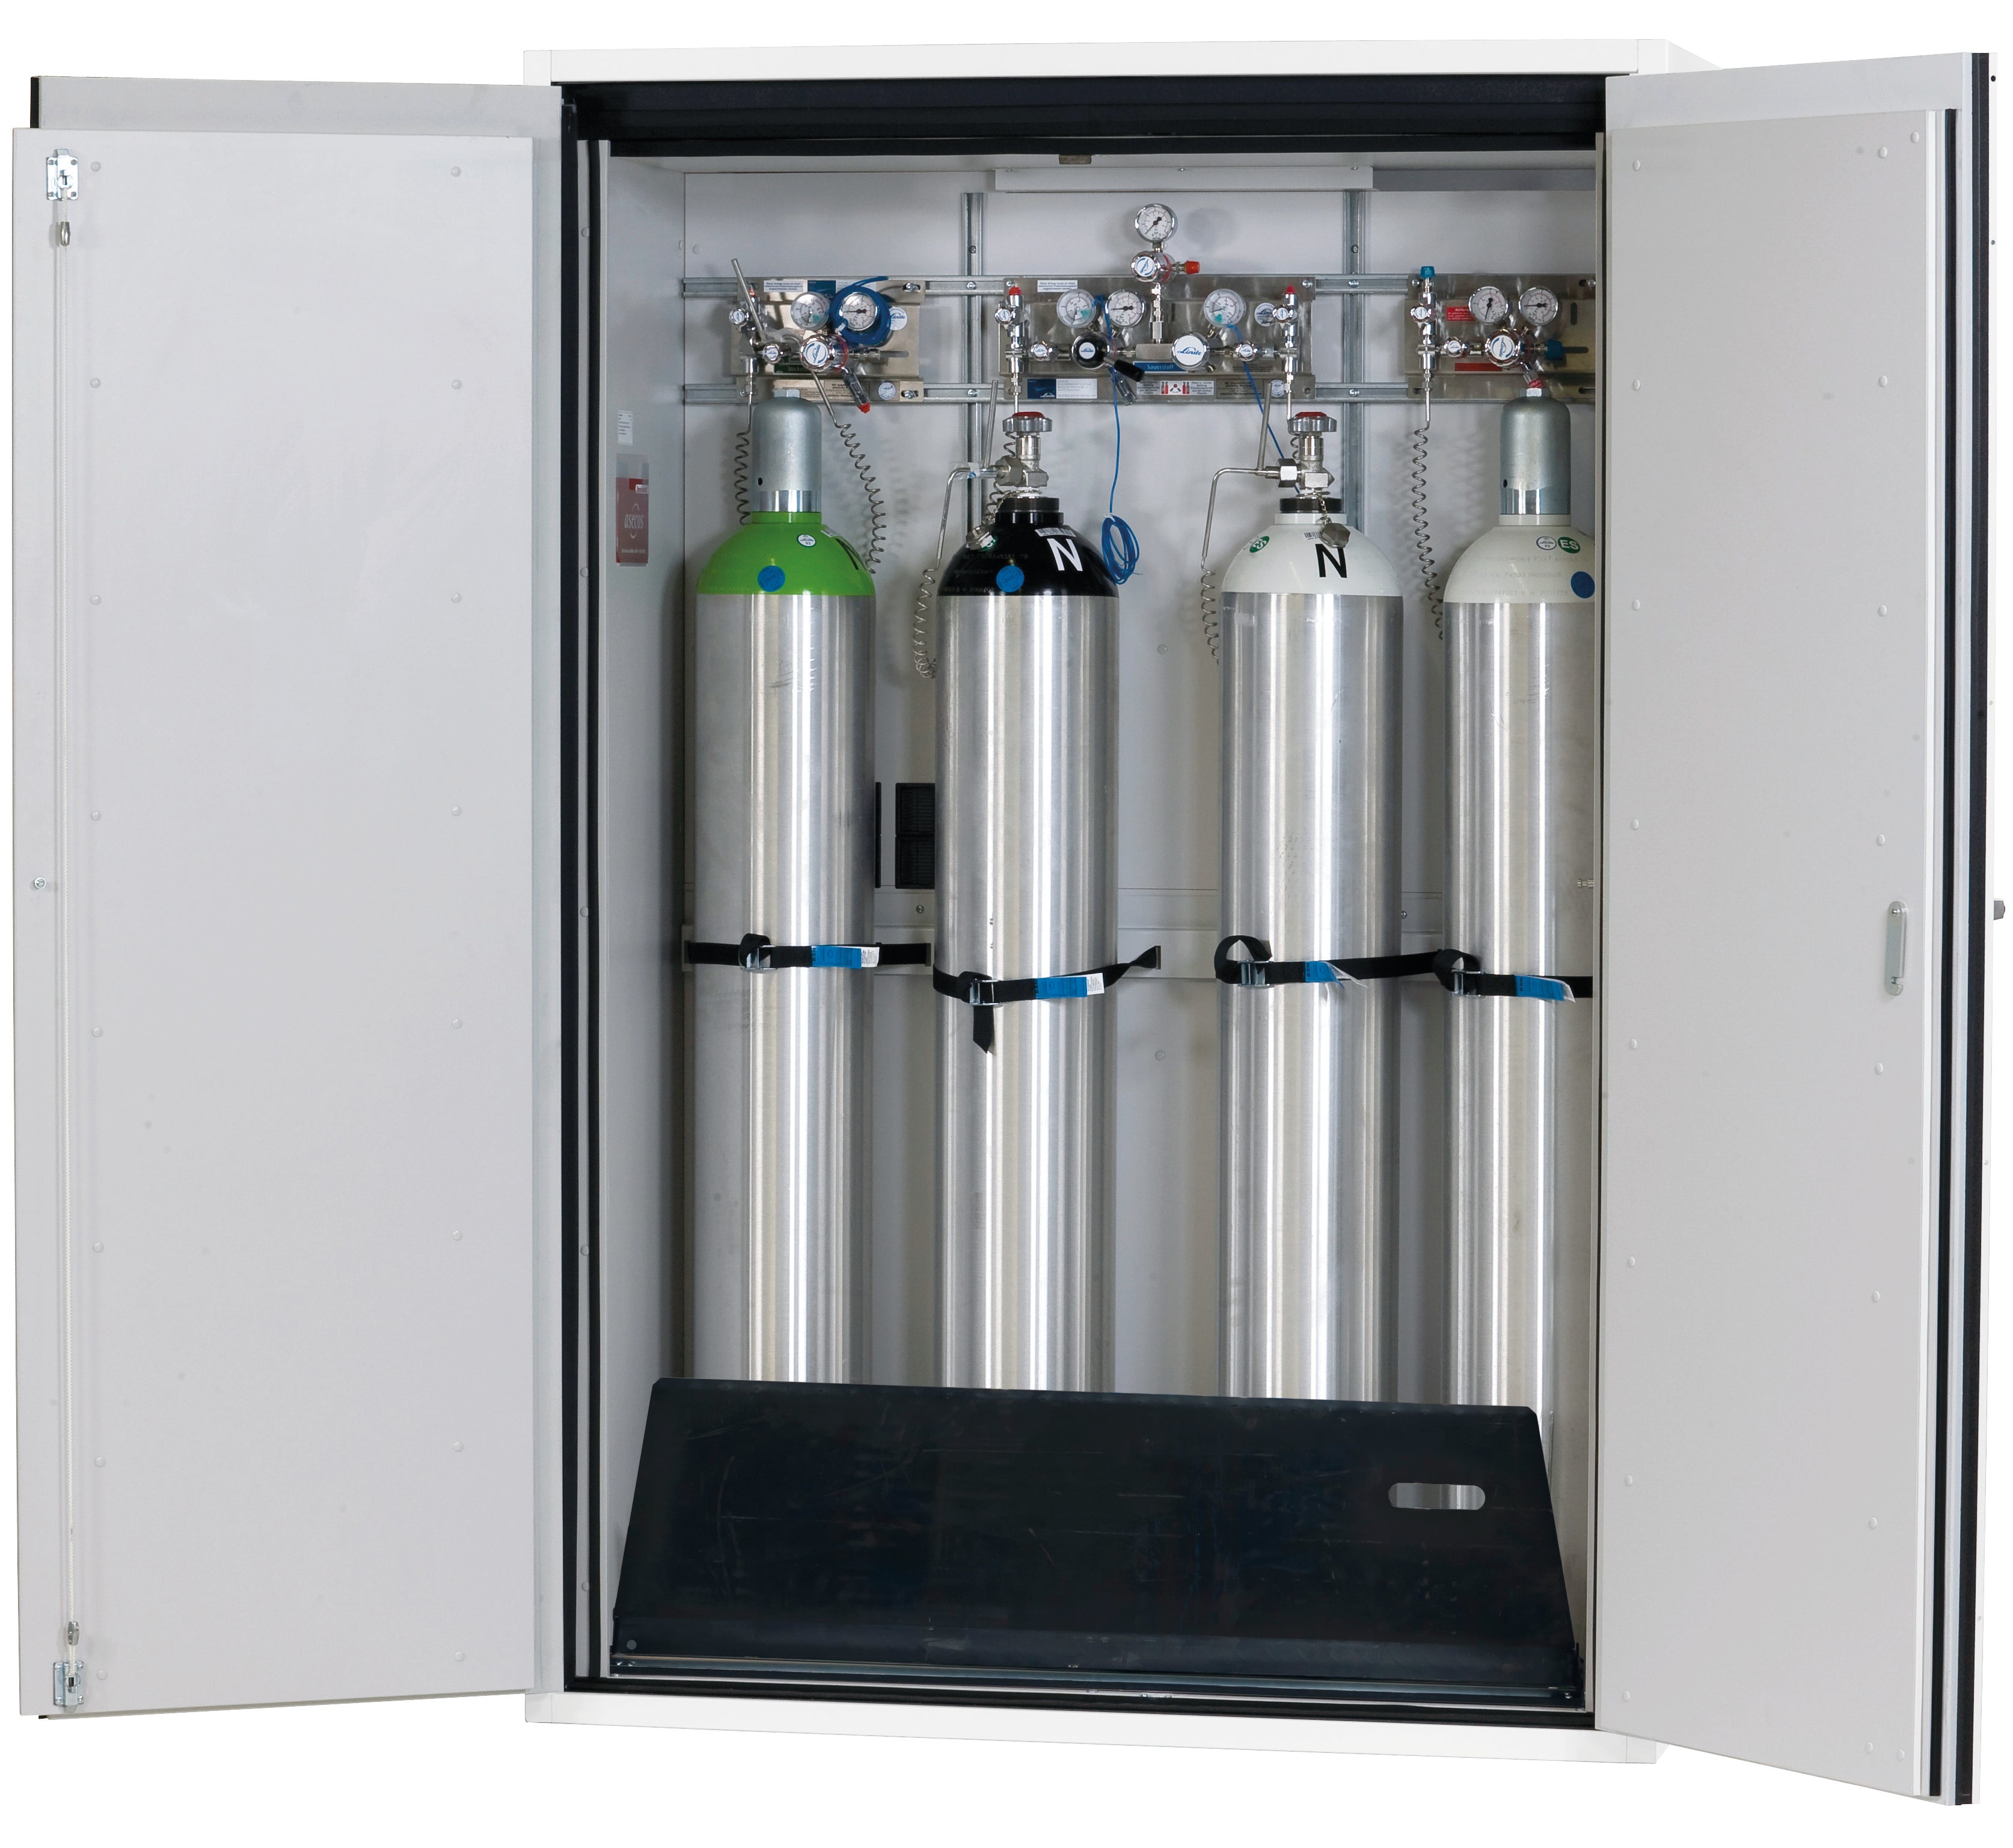 Type 90 compressed gas bottle cabinet G-ULTIMATE-90 model G90.205.140 in laboratory white (similar to RAL 9016) with standard interior fittings for 4x compressed gas bottles of 50 liters each